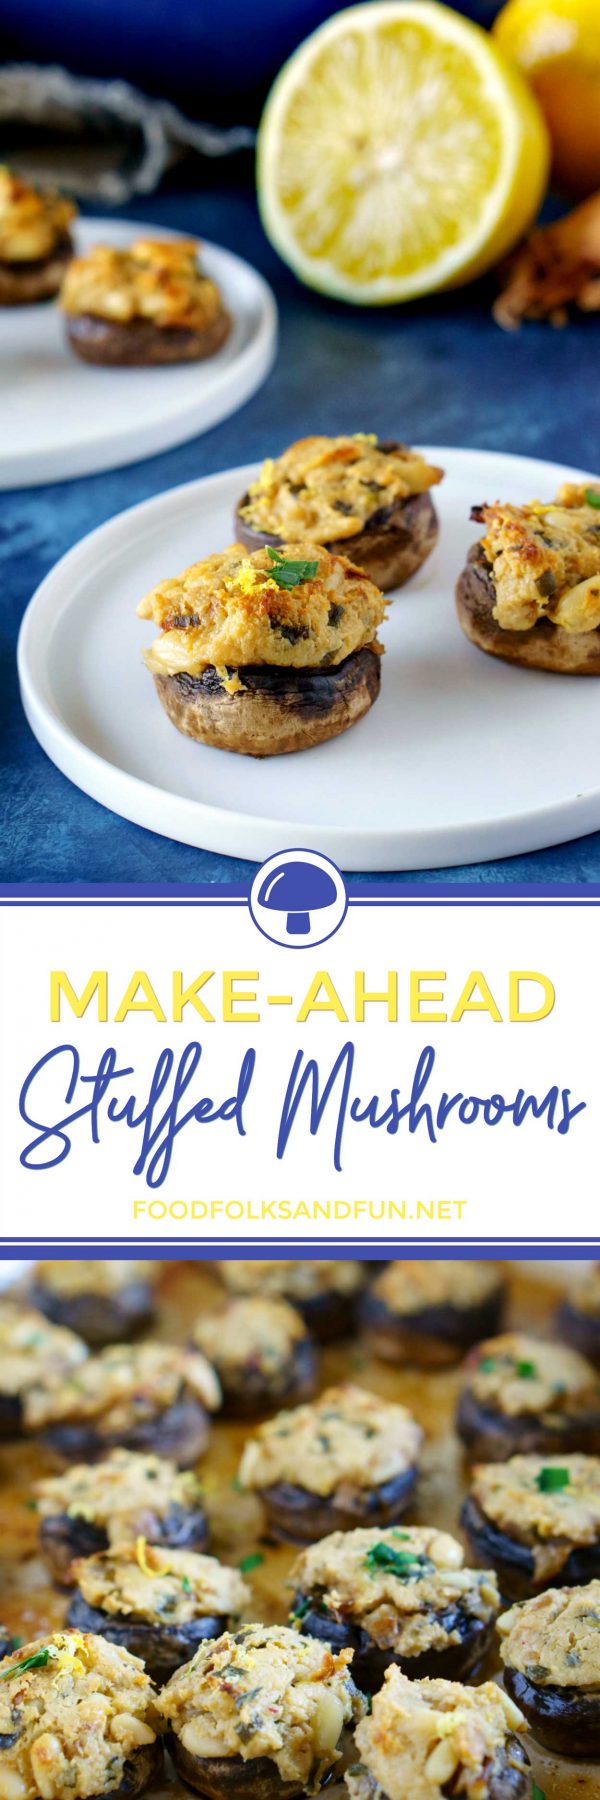 Make-Ahead Stuffed Mushrooms with Goat Cheese and Pine Nuts are a great Thanksgiving appetizer that you can make the day before! via @foodfolksandfun